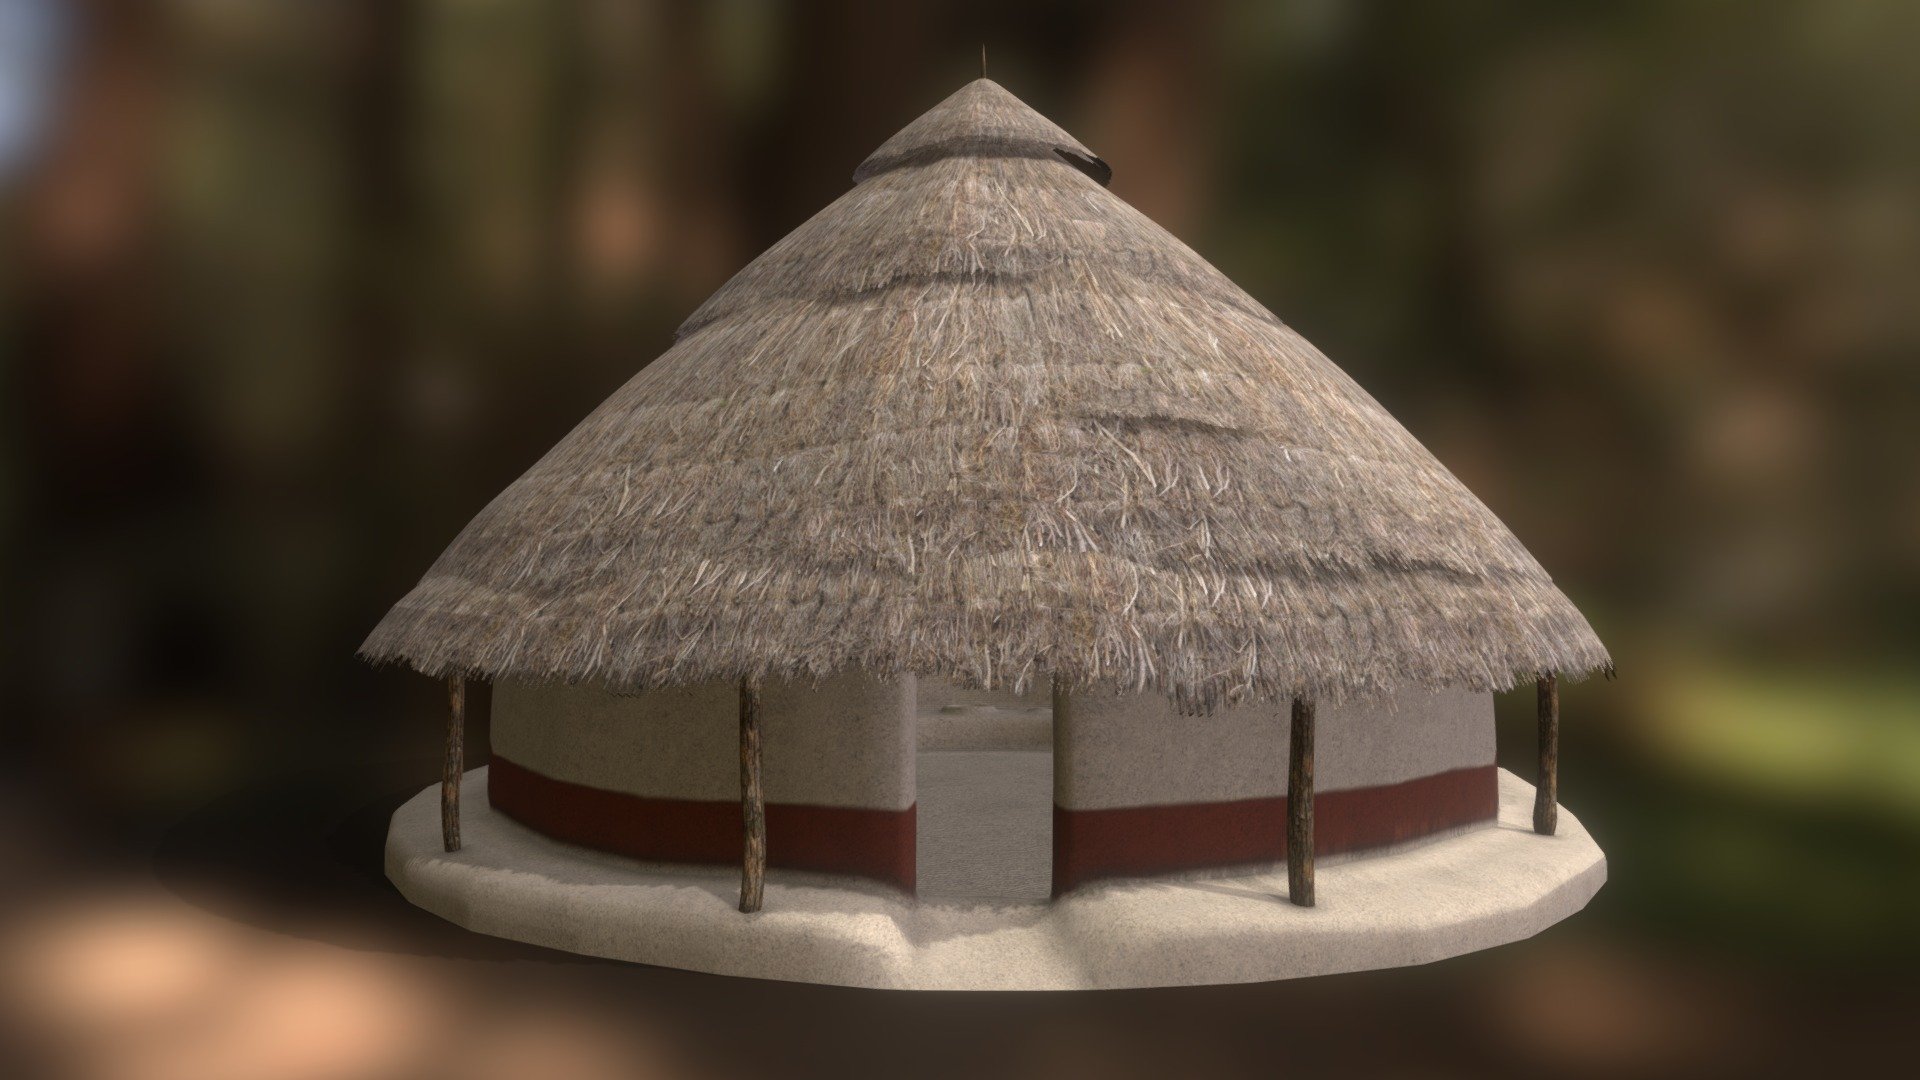 A traditional hut of the Luo people. A typical homestead consisted of several huts, including one for the husband and separate huts for each wife or adult sons.

This specific hut is large and spacious, of a grandeur typically only enjoyed by the first wife of an established family. That said, individual taste, style, availability of material, and general economic means resulted in great diversity among the greater Luo community as regards the small details. Still, this hut can be seen as the most archetypal appearance, with differences in size or trim keeping to the same general design. Round huts like this one can still be seen at museums or cultural heritage sites across Kenya, and square-walled versions of similar design are common to this day in rural areas of the Luo Nyanza region.

Please see the annotations for details.



For further information, please visit: https://library.lesostories.com/product/luo-homestead/ - Luo First Wife's Hut (East Africa) - Medium Poly - Download Free 3D model by LESO Stories (@LESOStories) 3d model